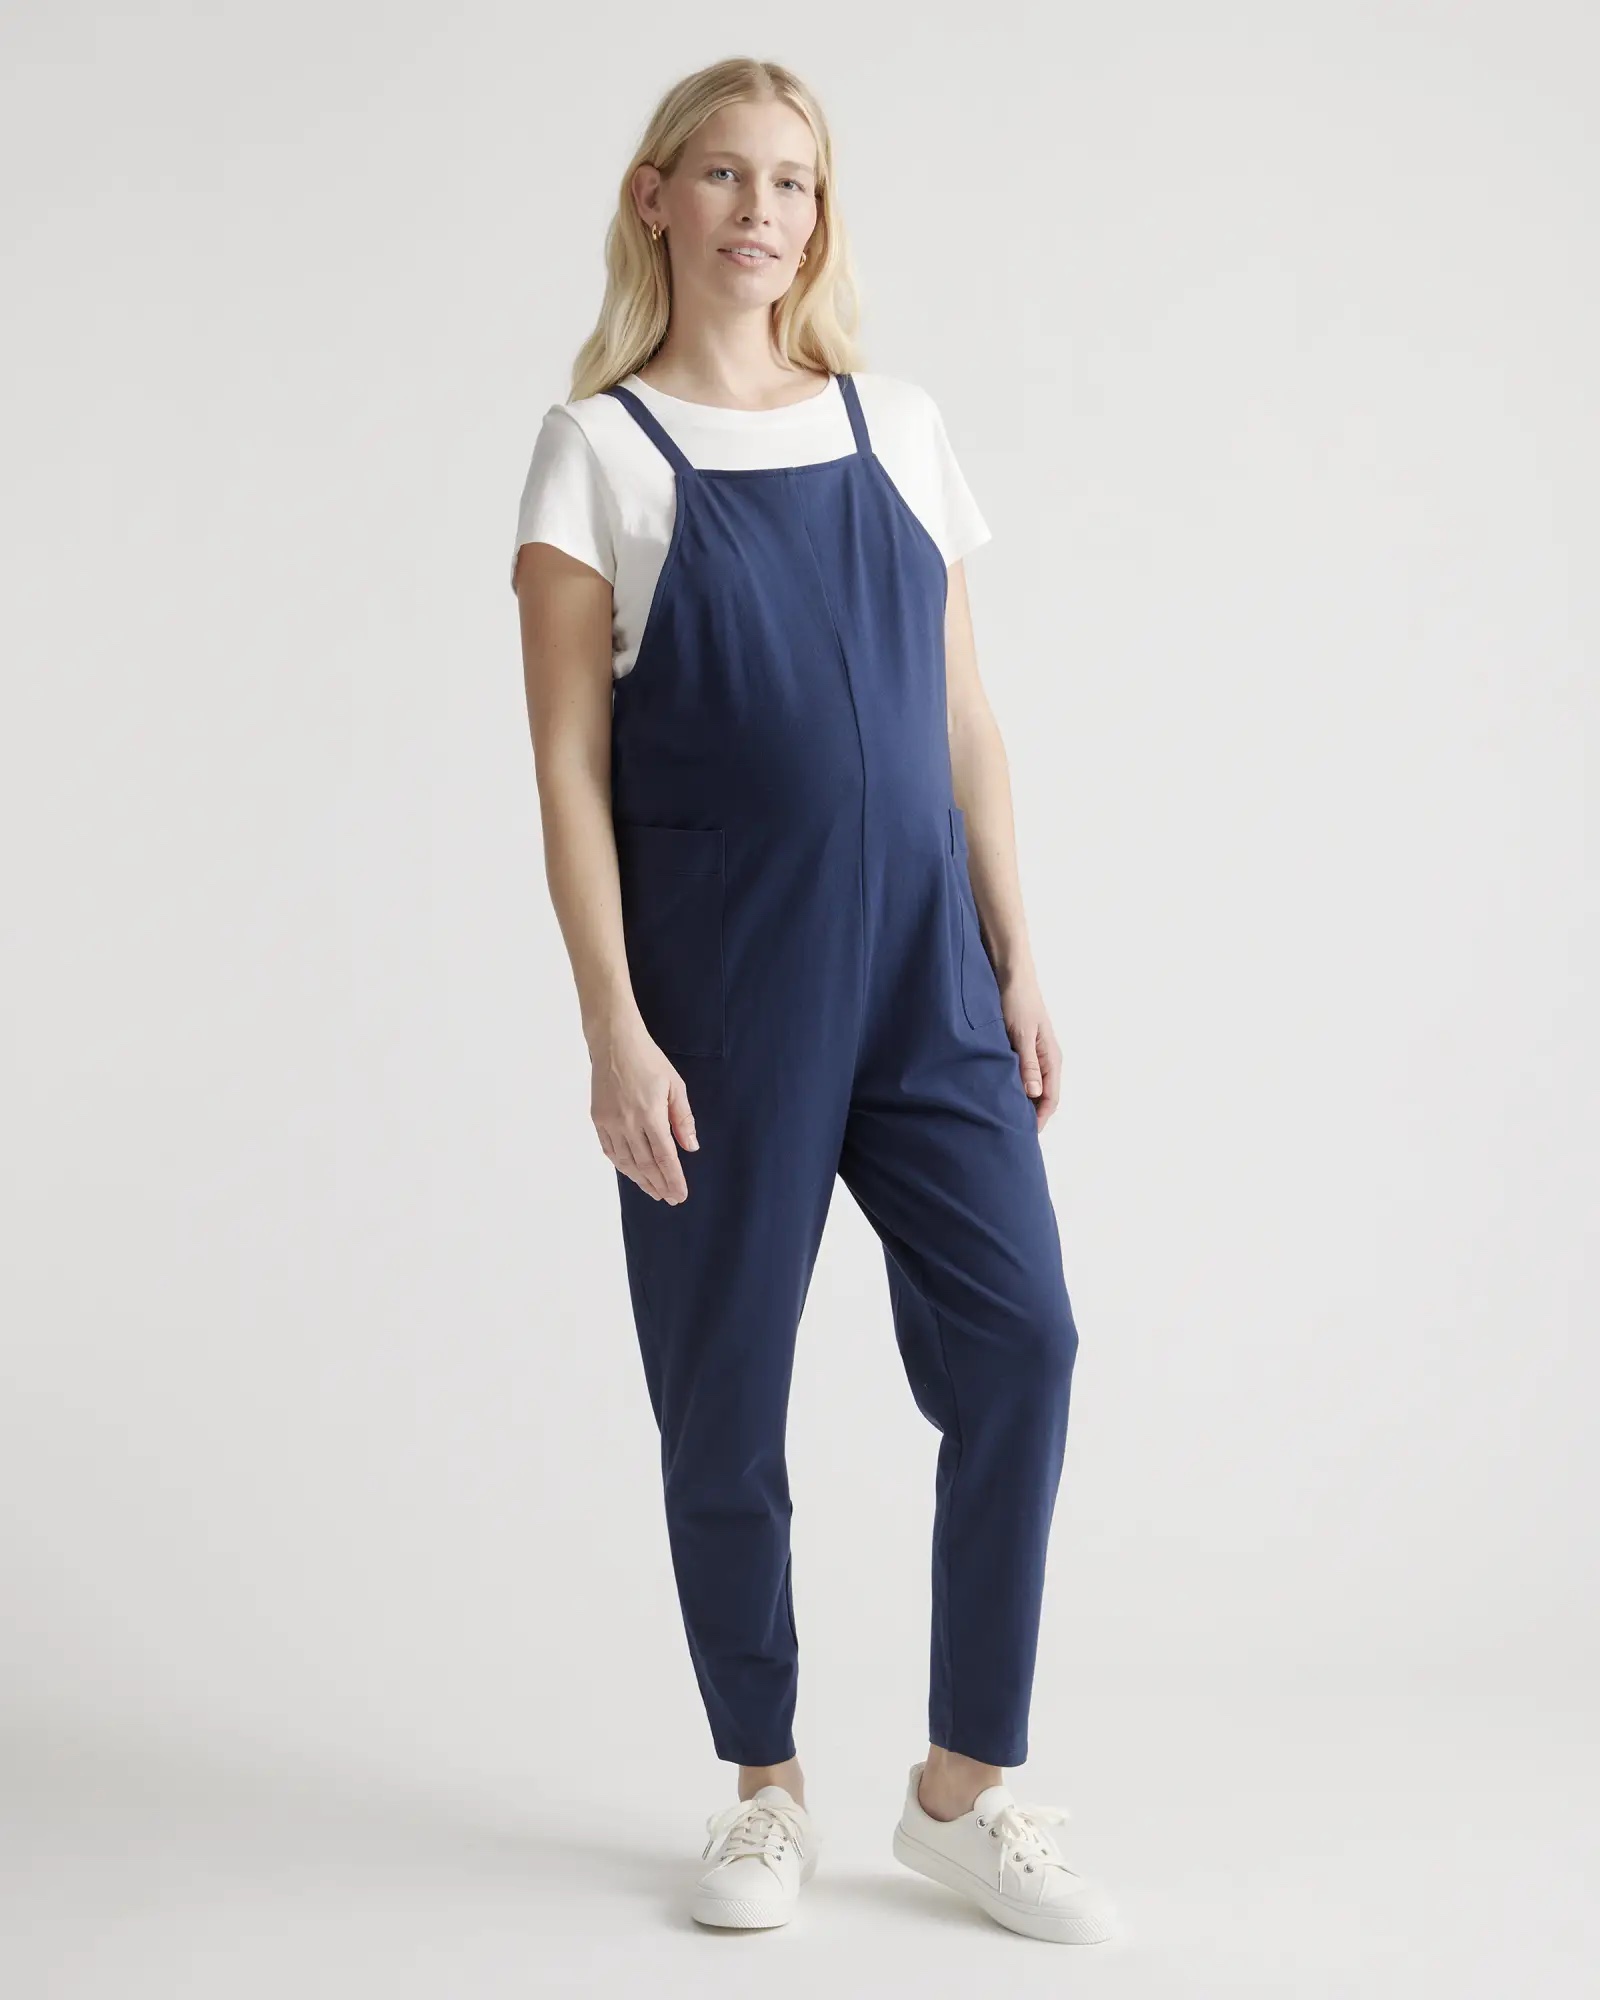 The chic expecting mother needs an affordable, stylish work wear